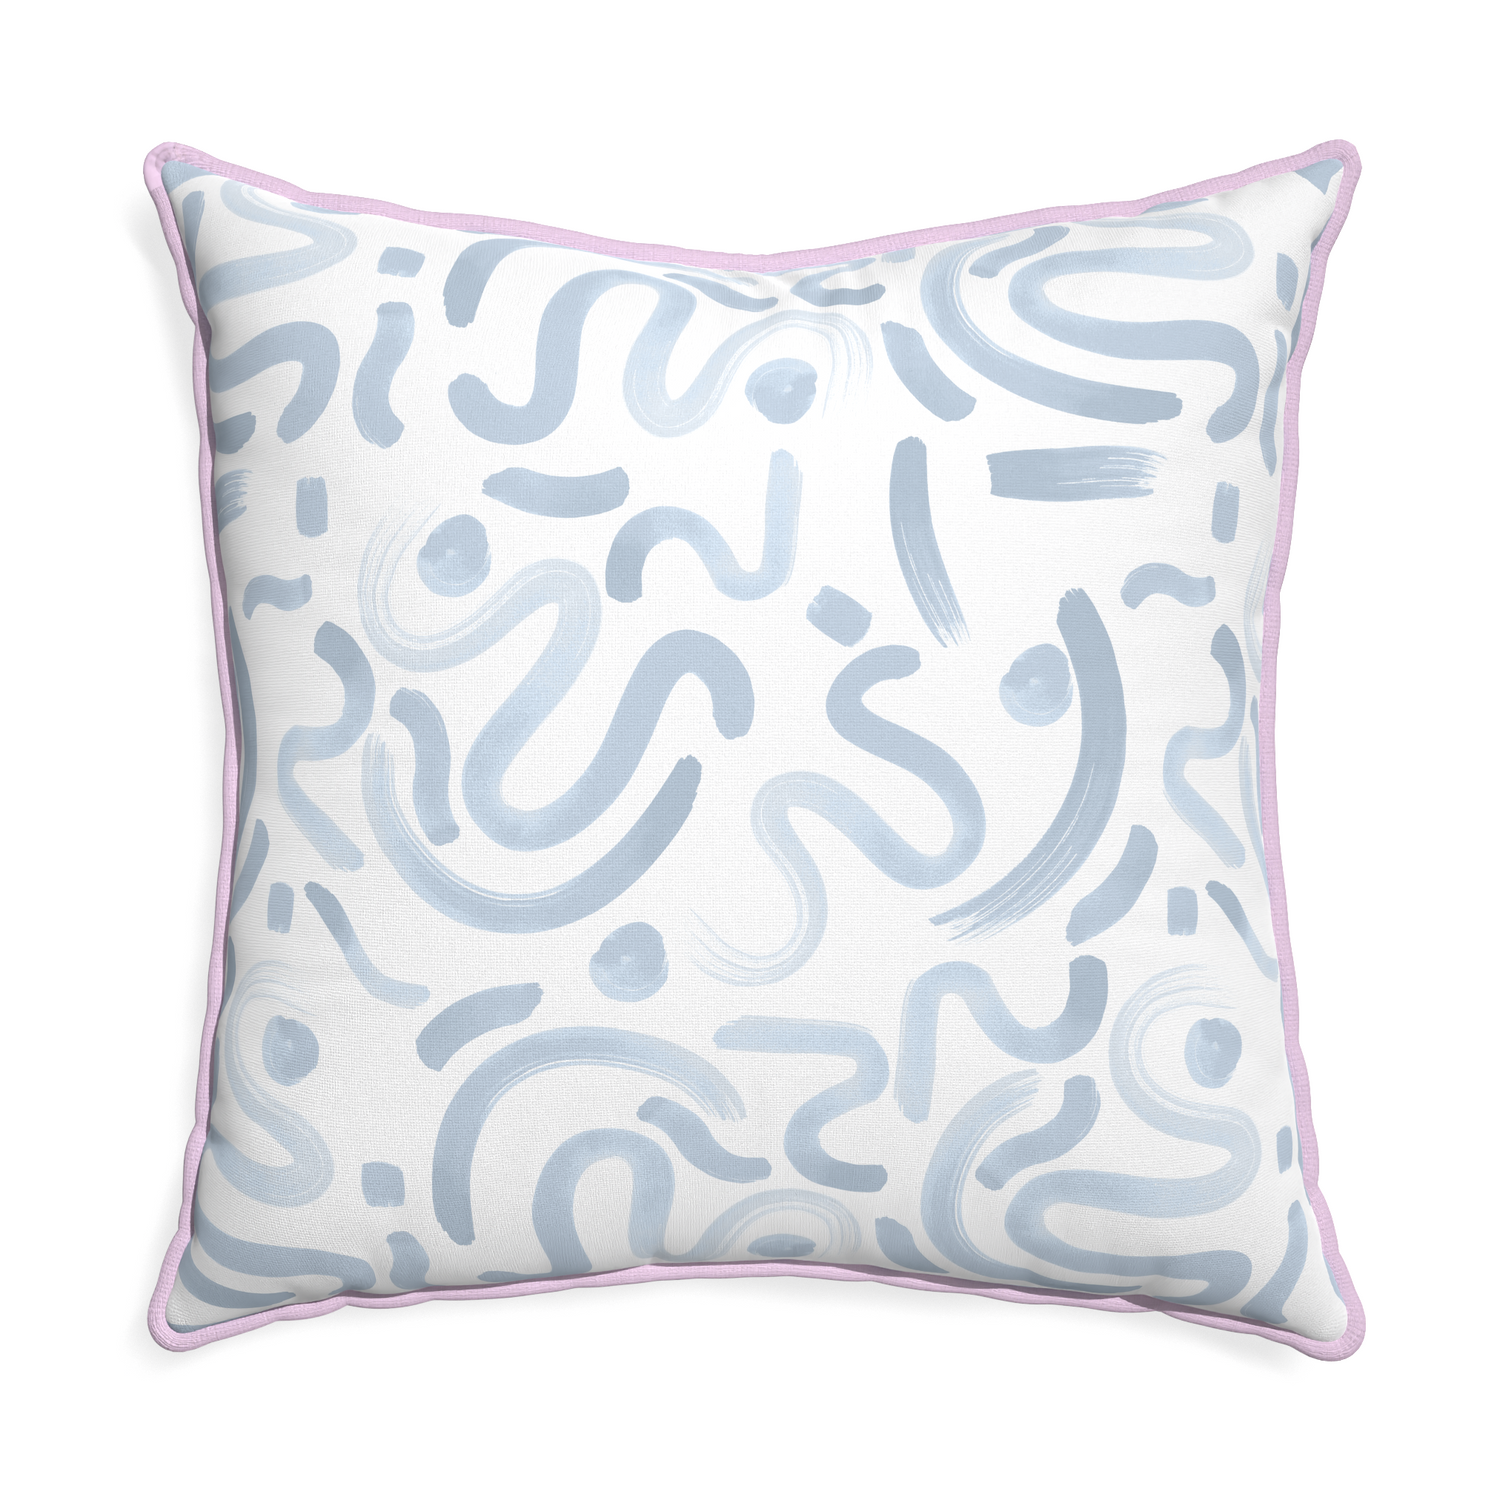 Euro-sham hockney sky custom pillow with l piping on white background